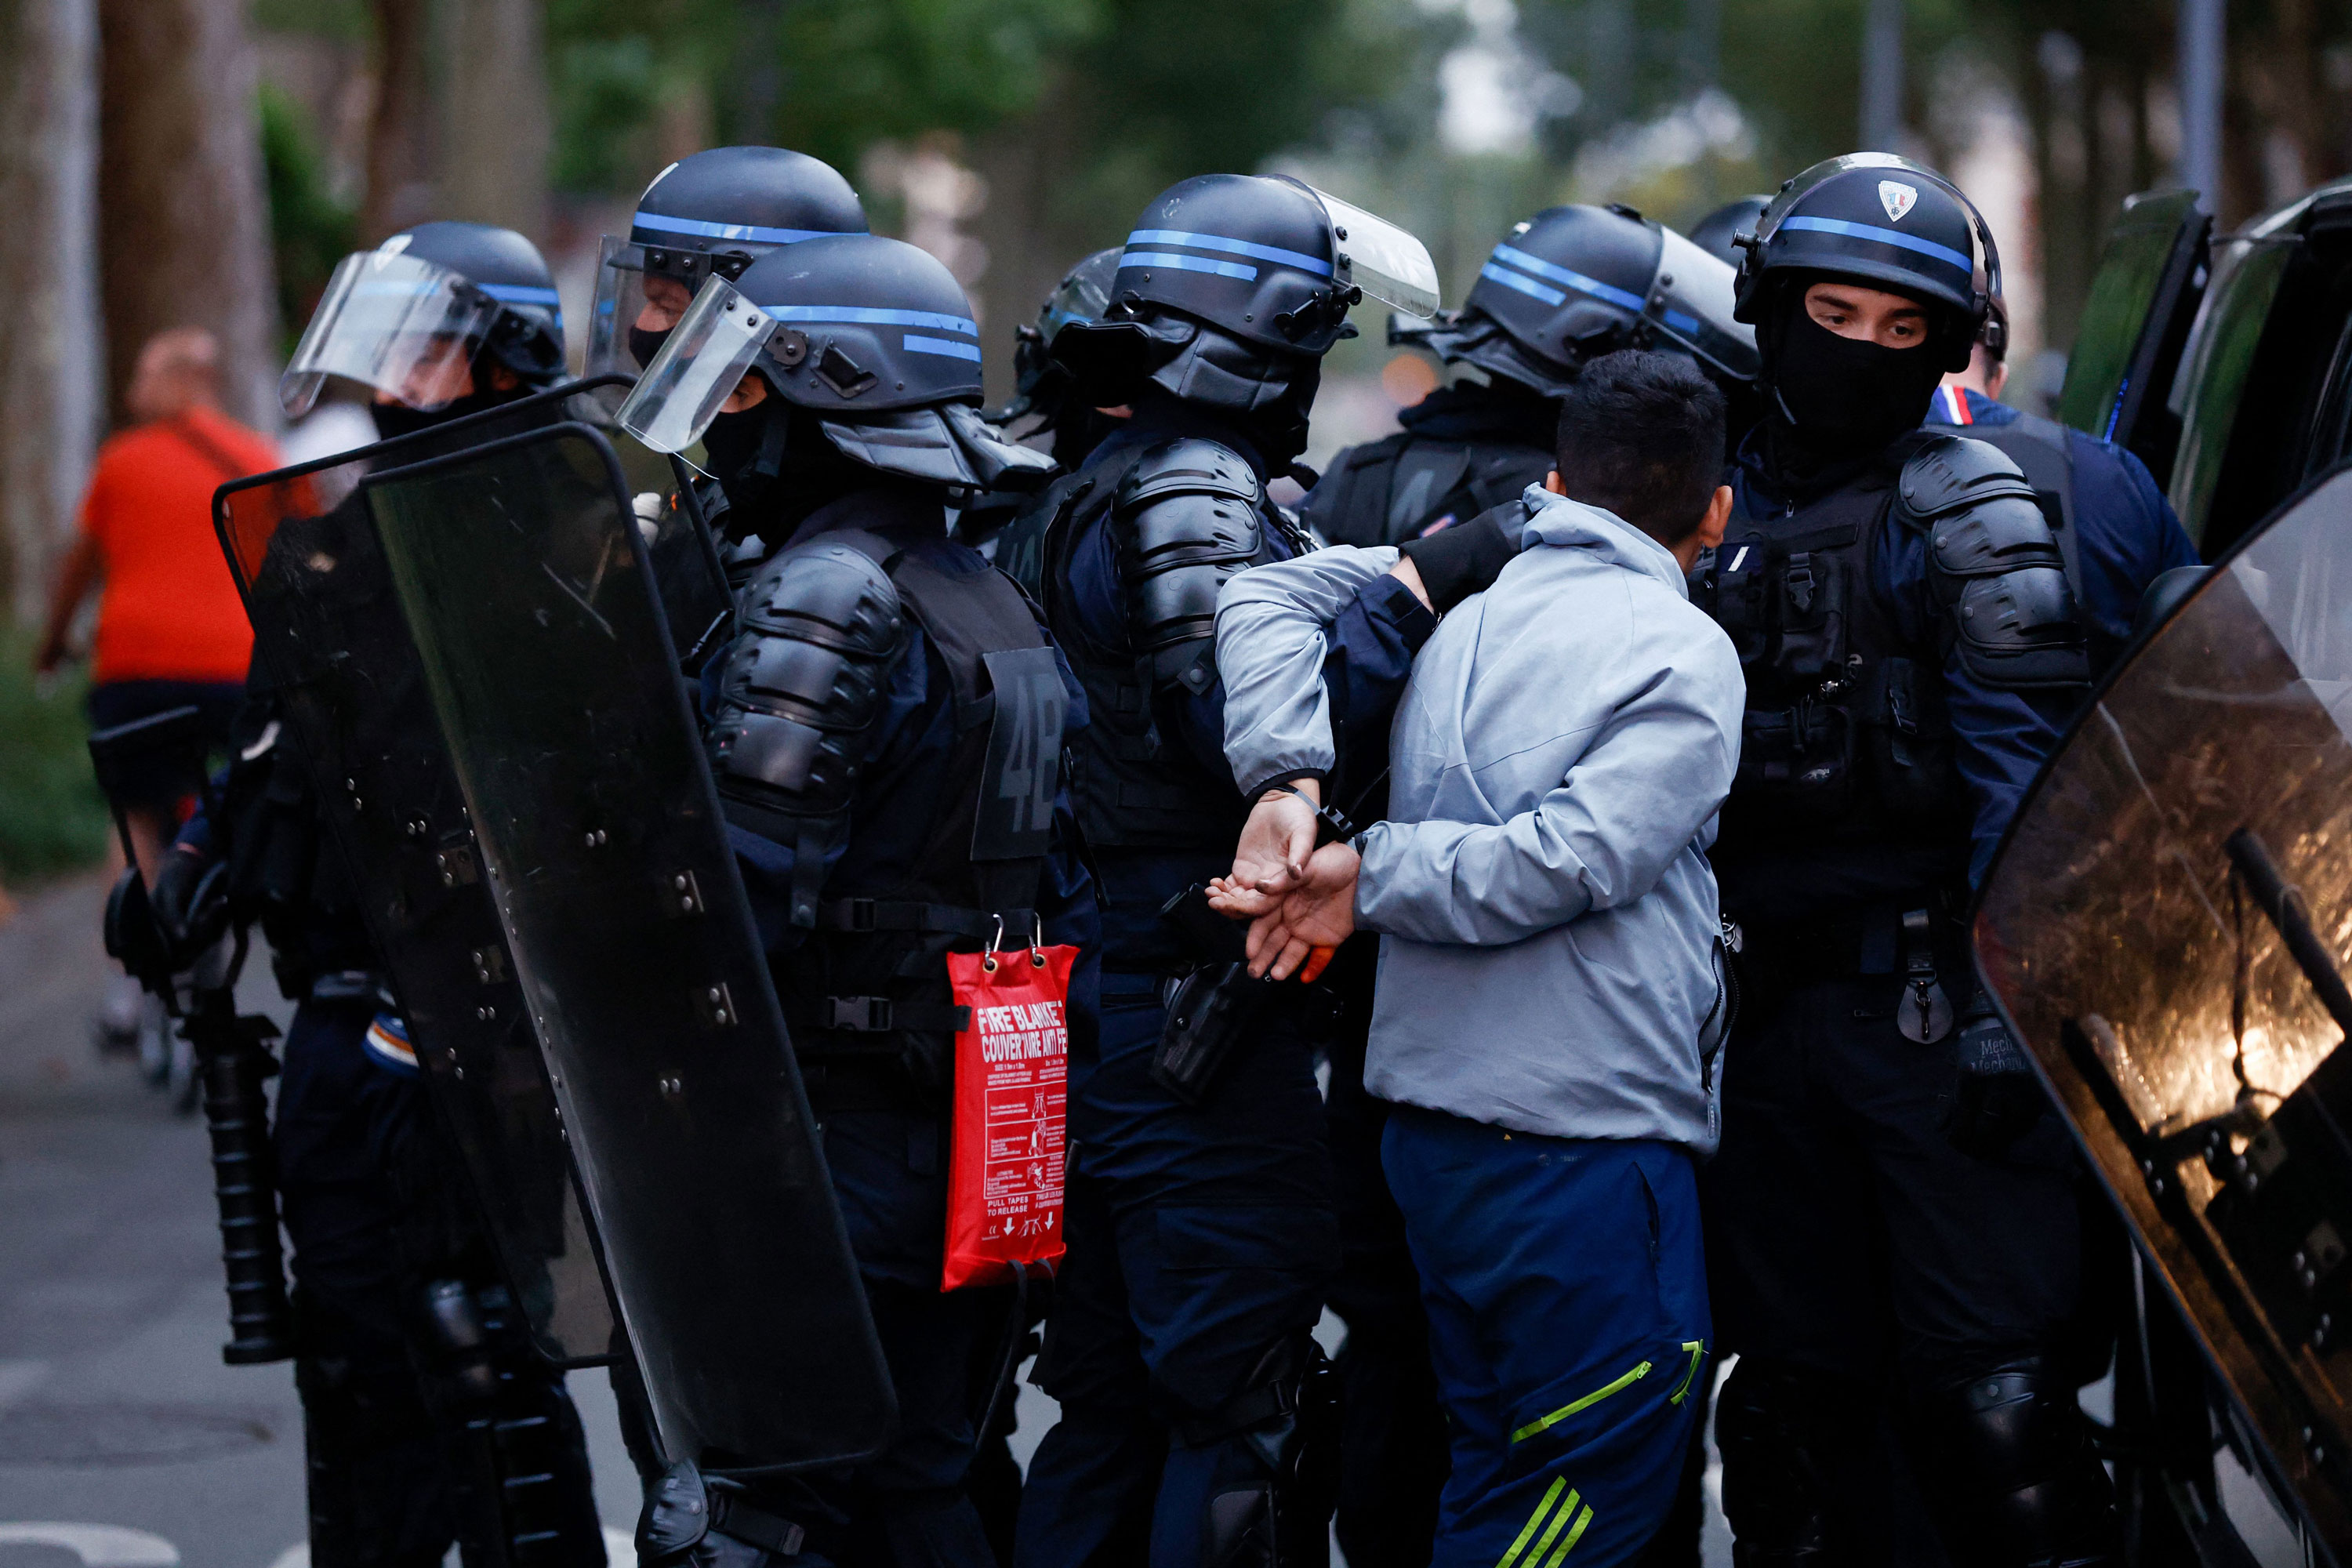 Live updates: Protests rock France after police shooting of teenager